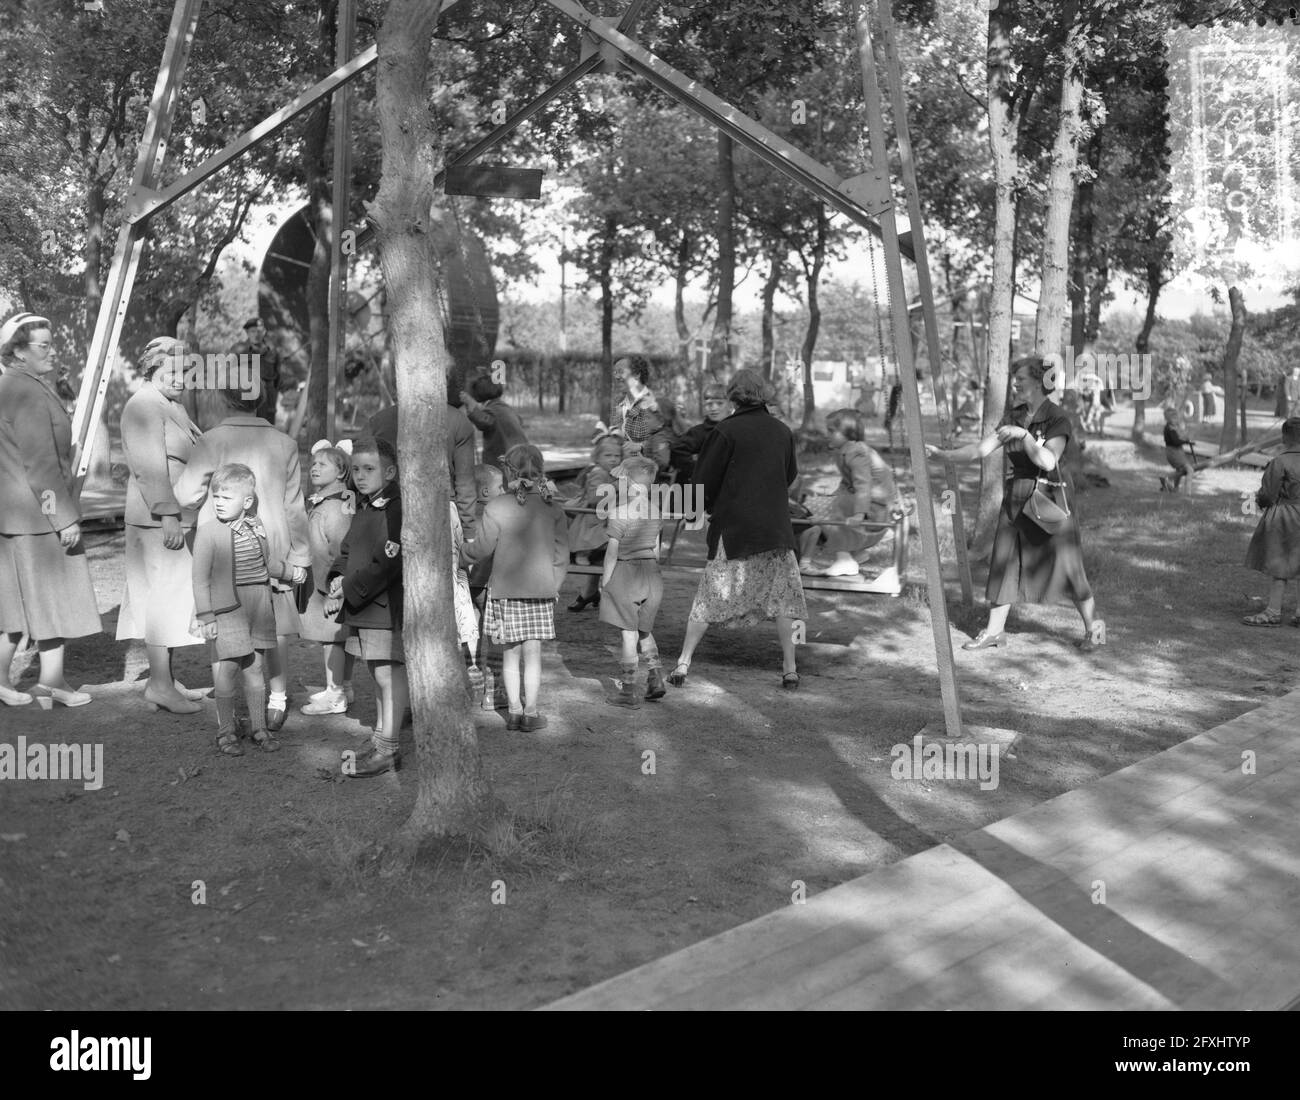 Queen Juliana and Princess Margriet visit playground Oud Naarden recorded by television, June 14, 1954, visits, queens, royal family, princesses, television, The Netherlands, 20th century press agency photo, news to remember, documentary, historic photography 1945-1990, visual stories, human history of the Twentieth Century, capturing moments in time Stock Photo